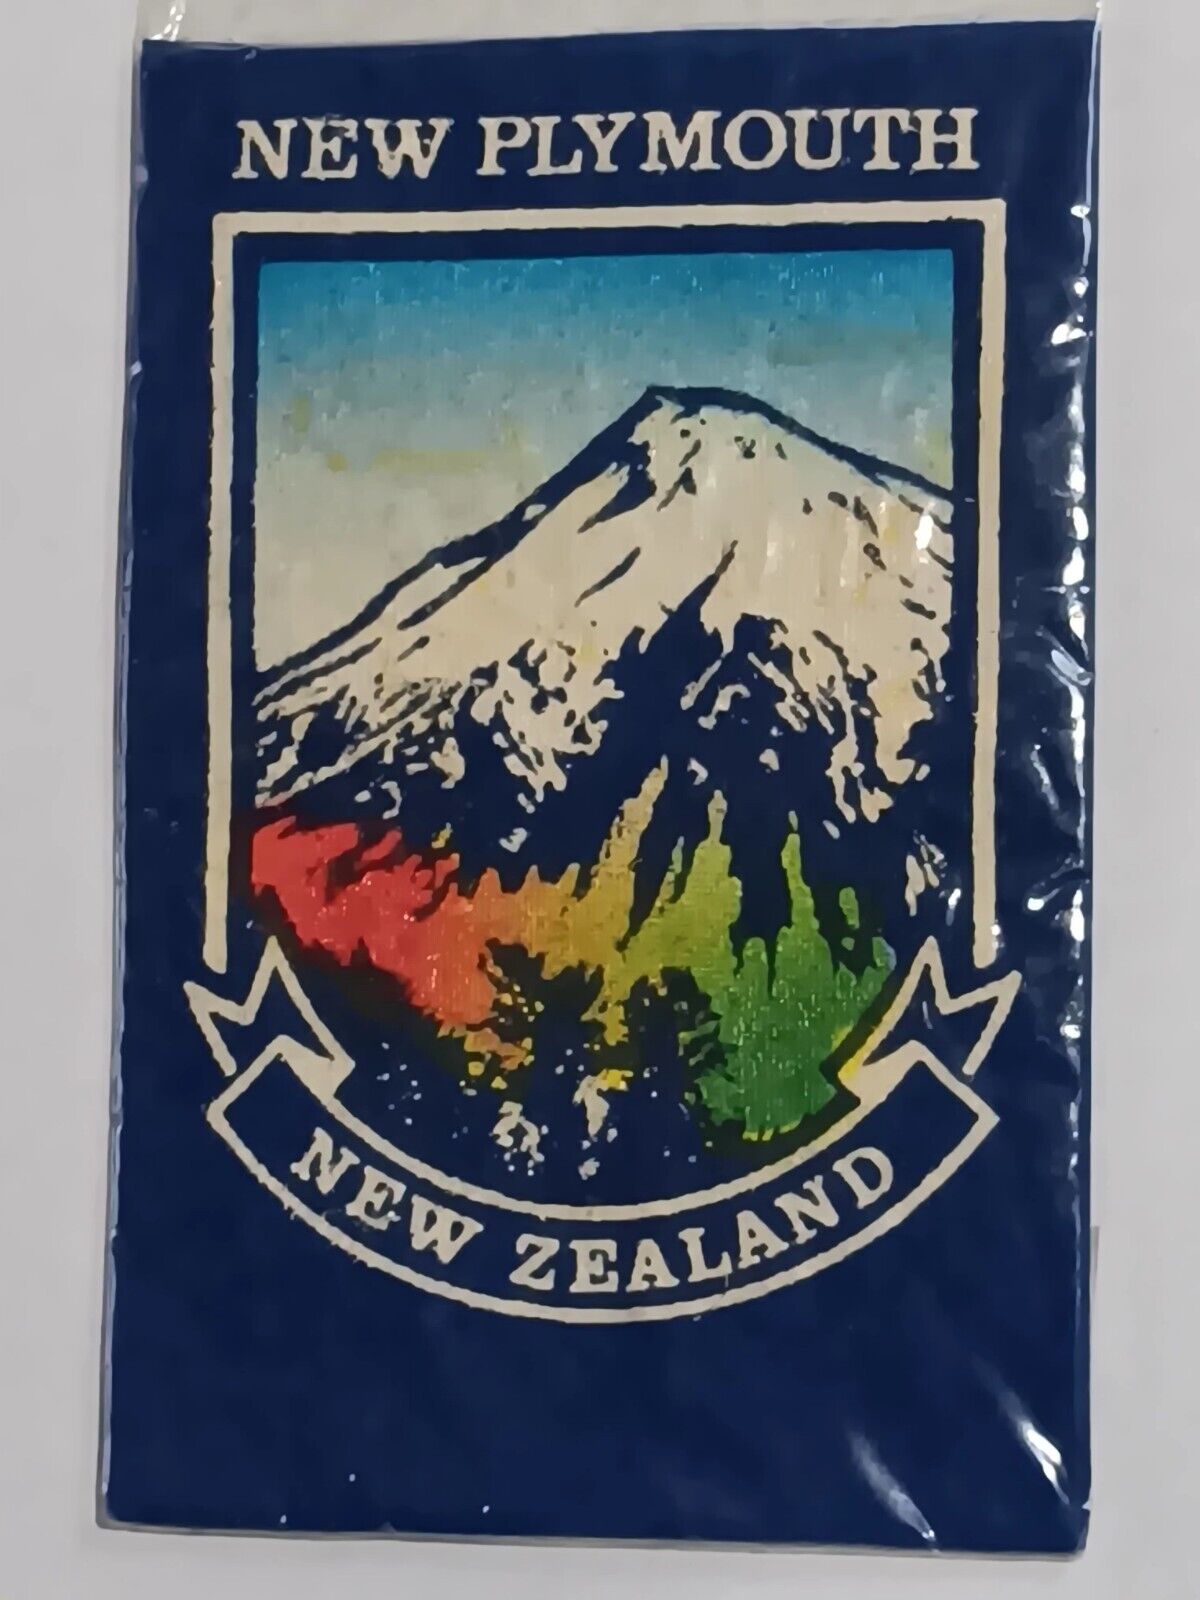 New Plymouth, New Zealand Vintage Printed Felt Square Patch Travel Souvenir New 